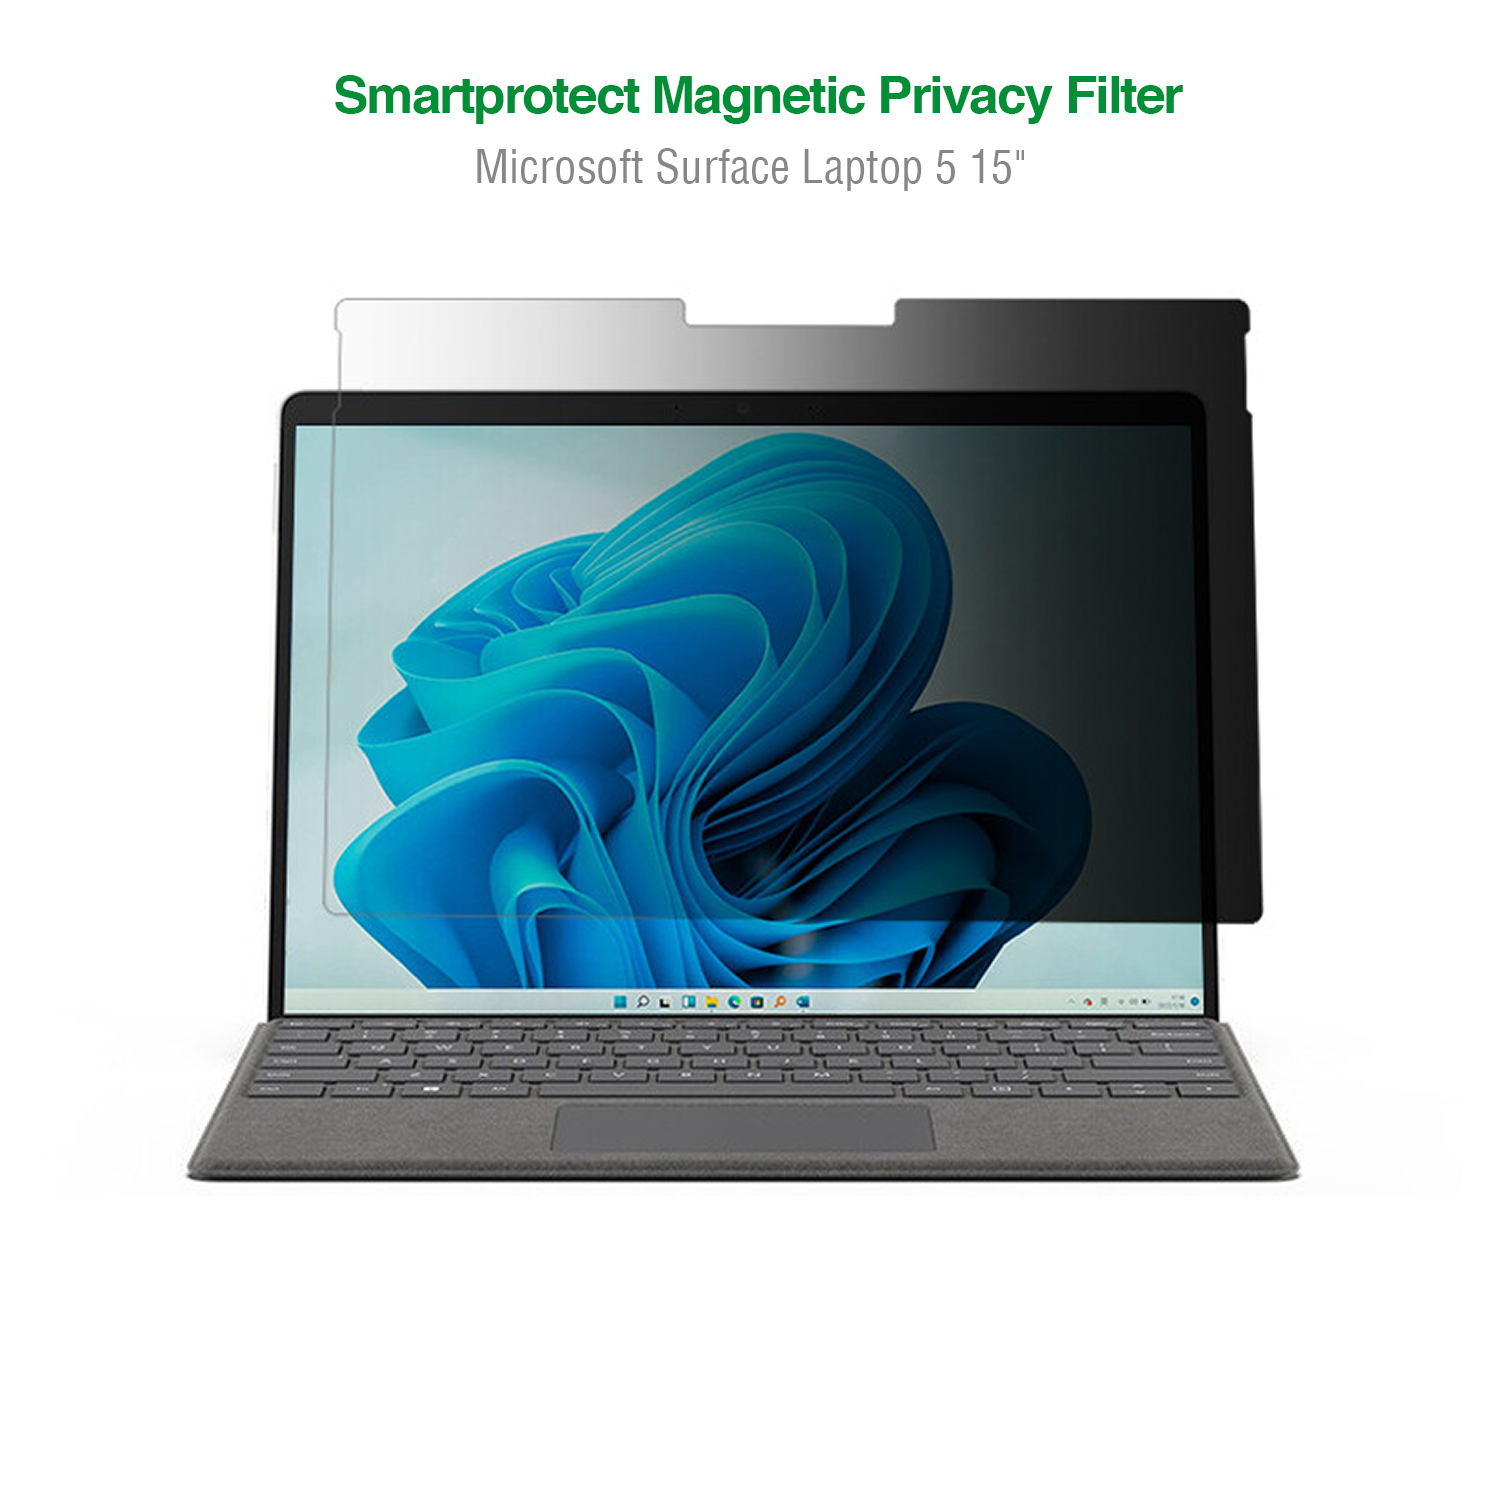 The mounting material and cleaning cloth are already included in the scope of delivery in addition to the privacy screen protector for your Microsoft Surface Laptop.